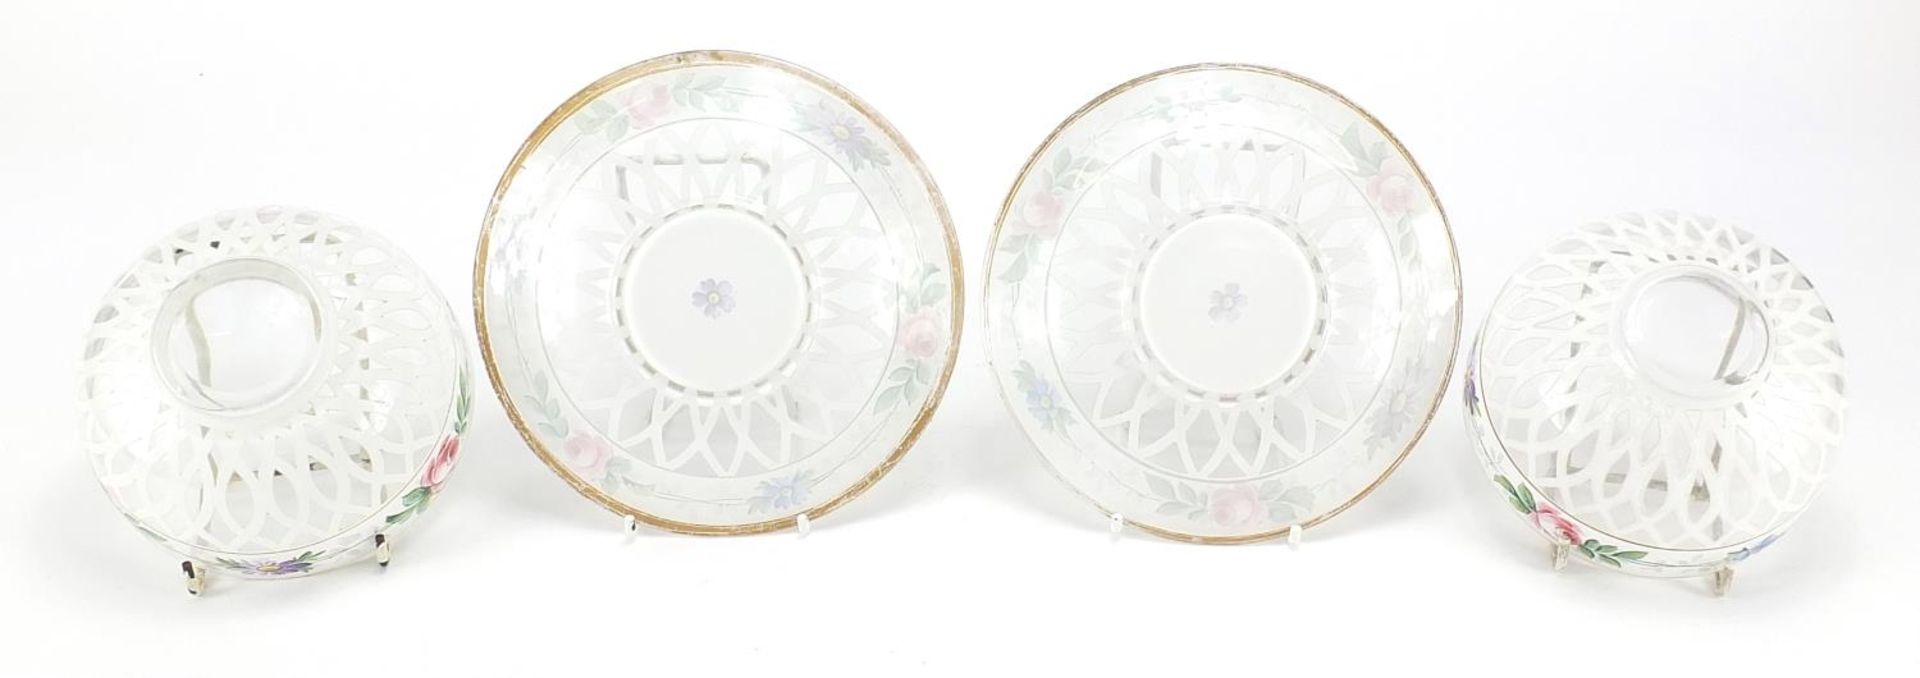 Pair of Bohemian white overlaid glass bowls with saucers, hand painted with flowers, each saucer - Image 3 of 4